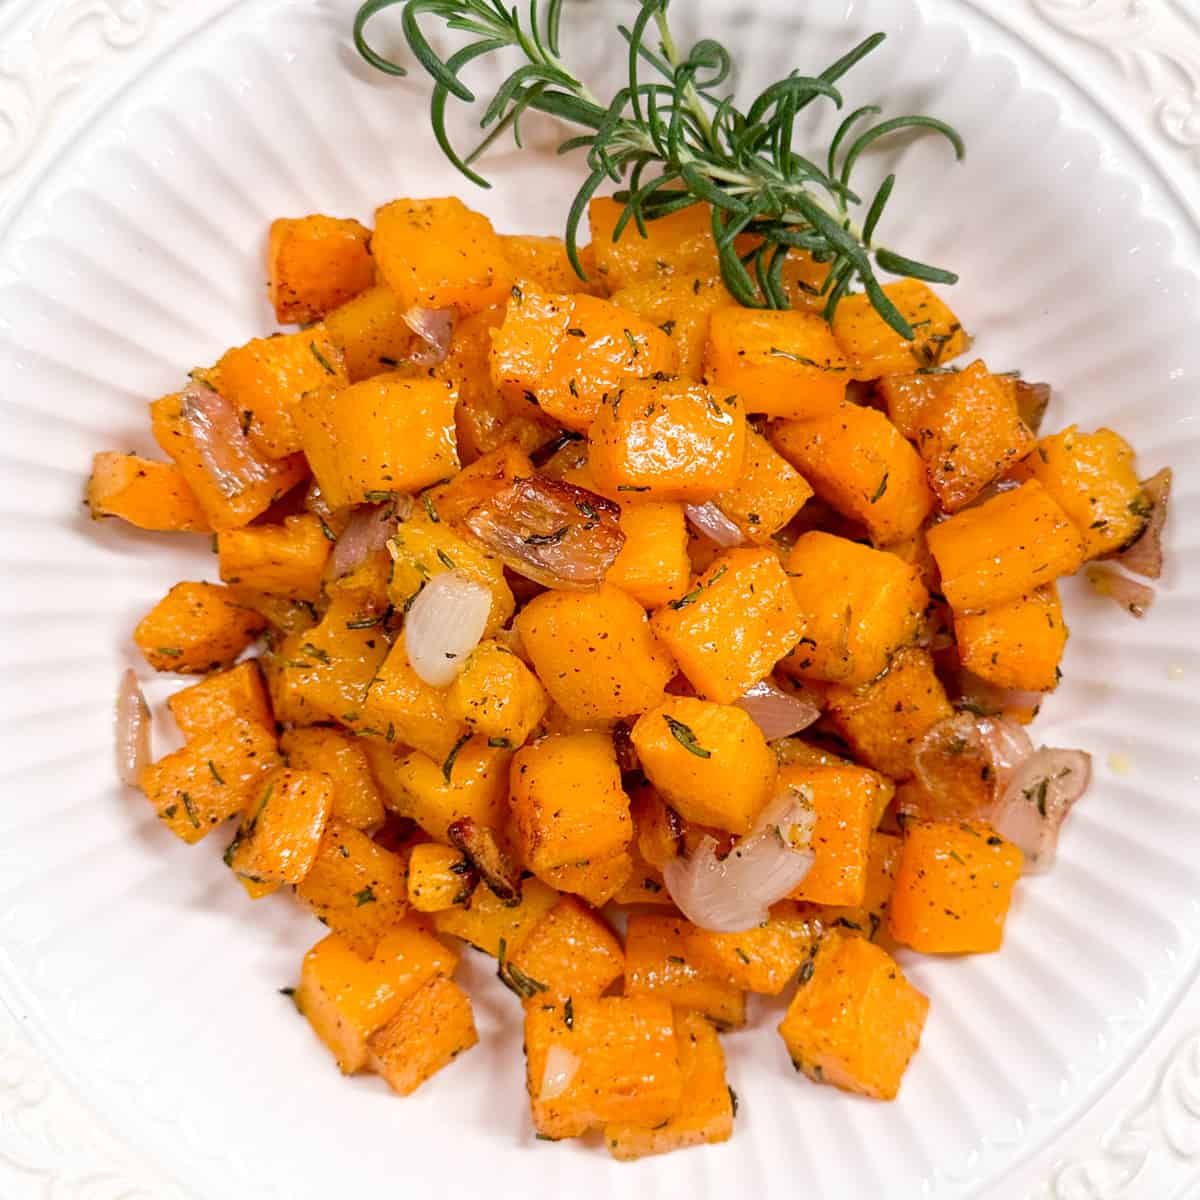 roasted diced butternut squash with shallots and rosemary